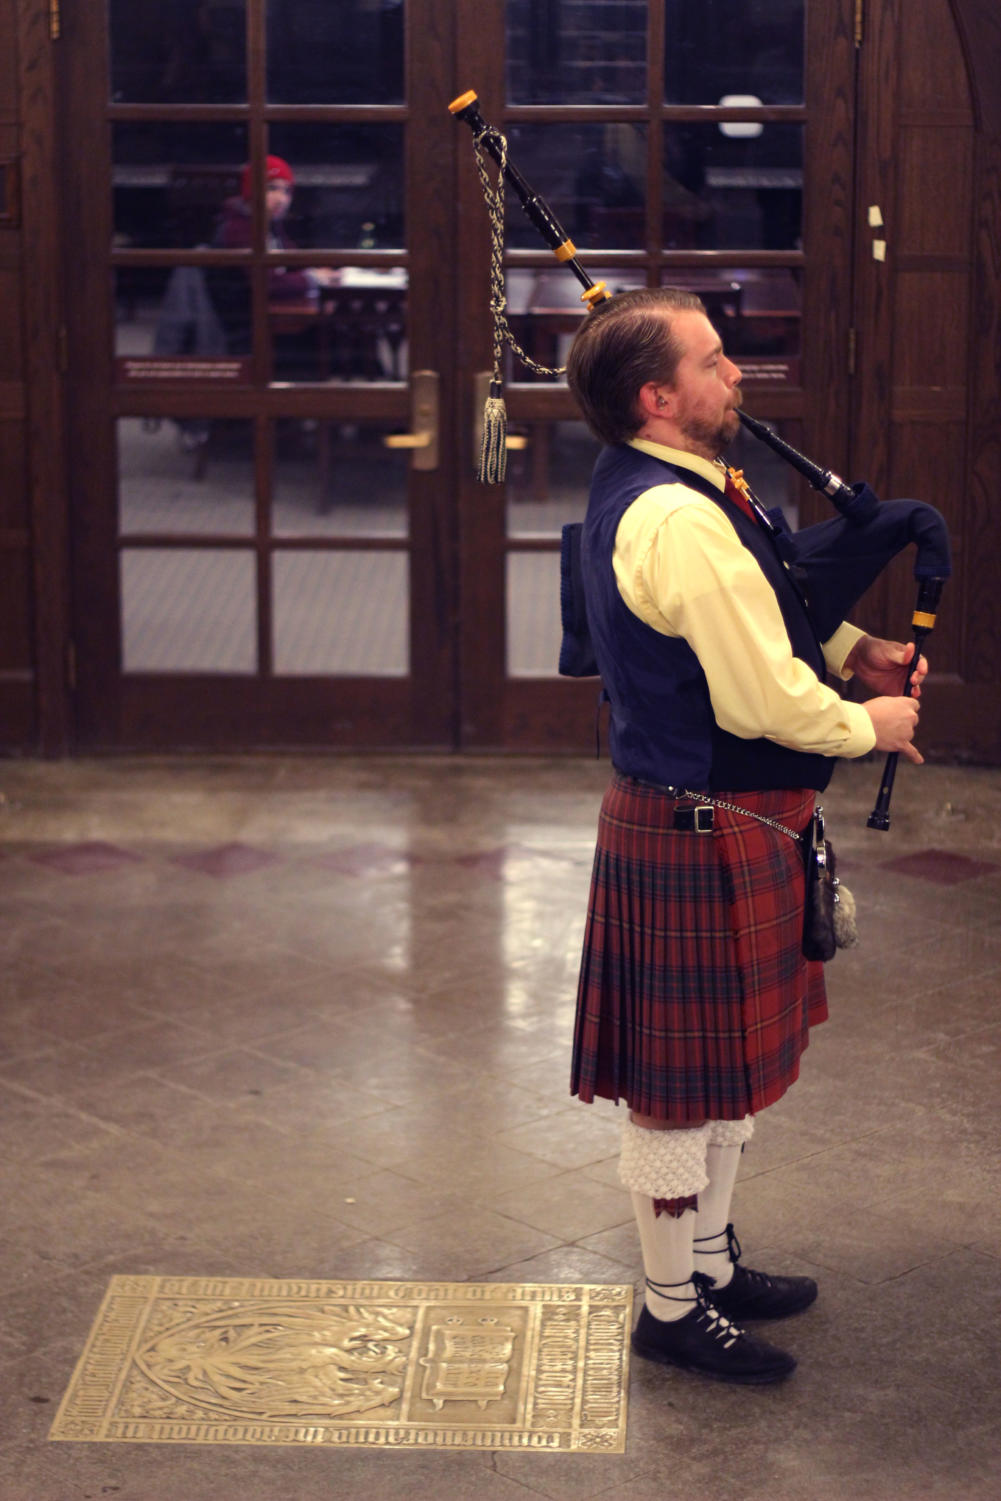 Steve Moore begins playing bagpipes to open one of the Folk Fest concert sets. Though this is Steve's first year playing the pipes for the Festival, the tradition of a bagpiper starting each show goes back to the very first Festival in 1961.